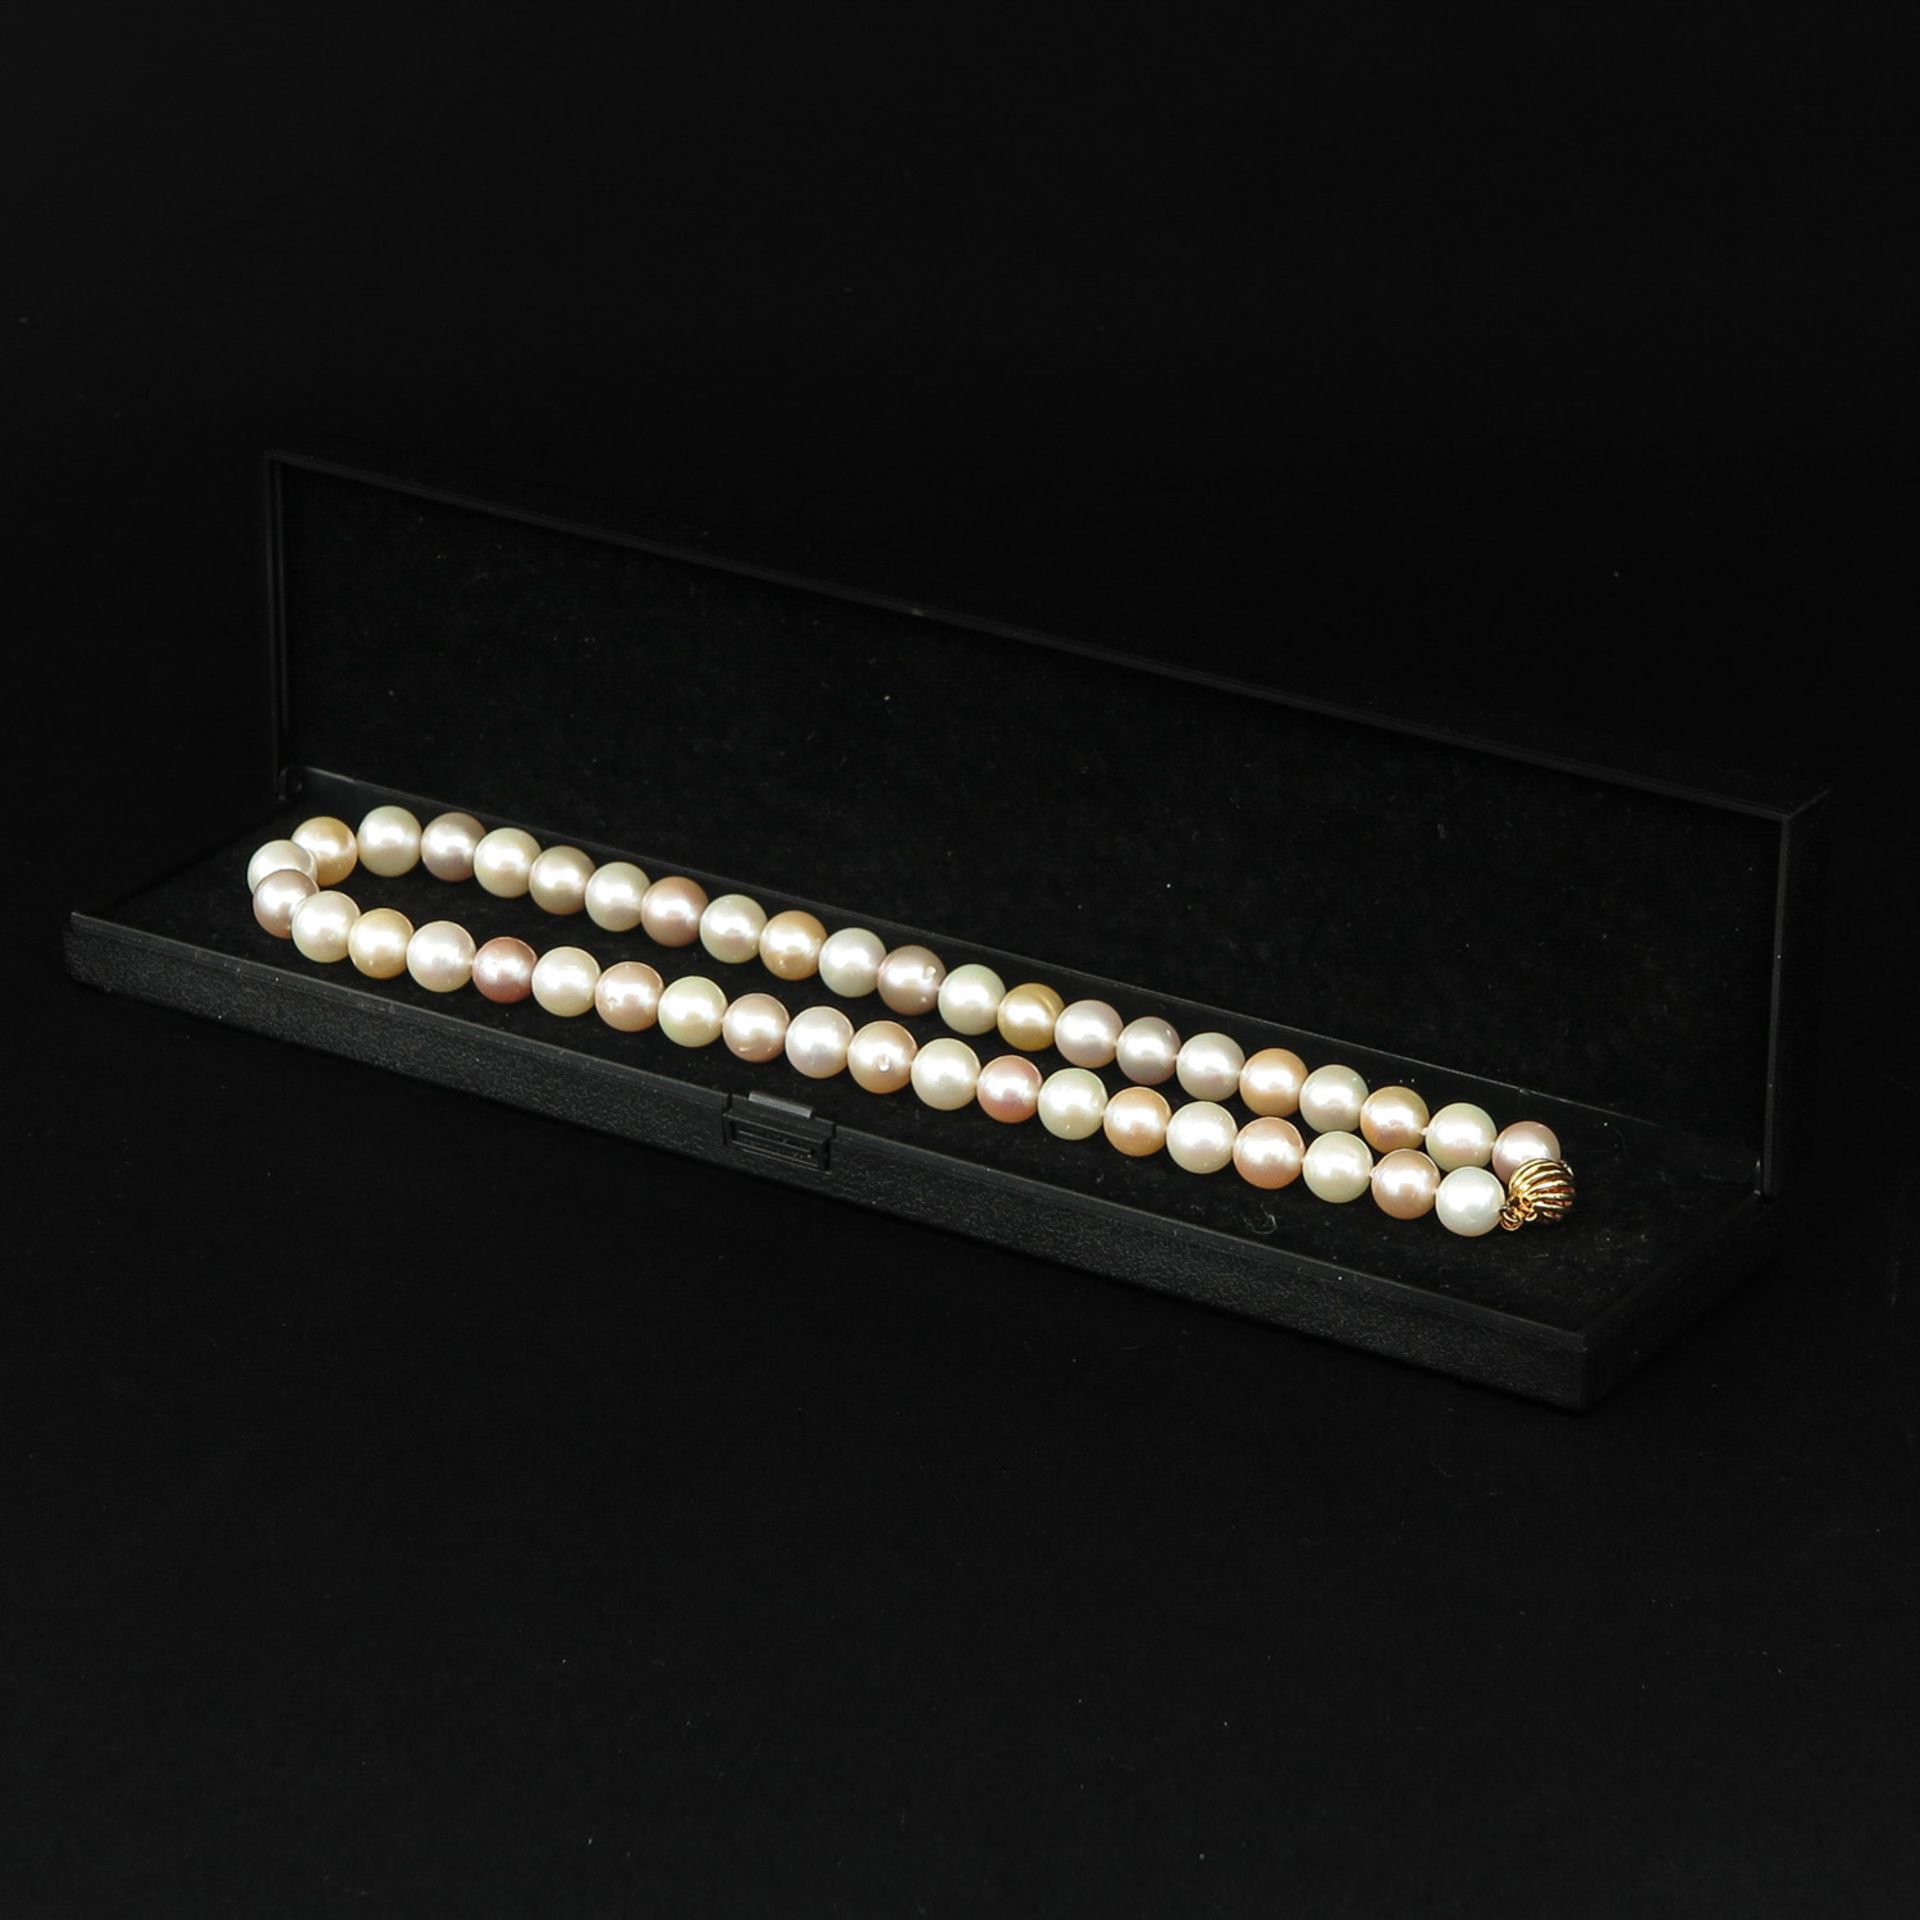 A Single Strand Pearl Necklace - Image 6 of 6